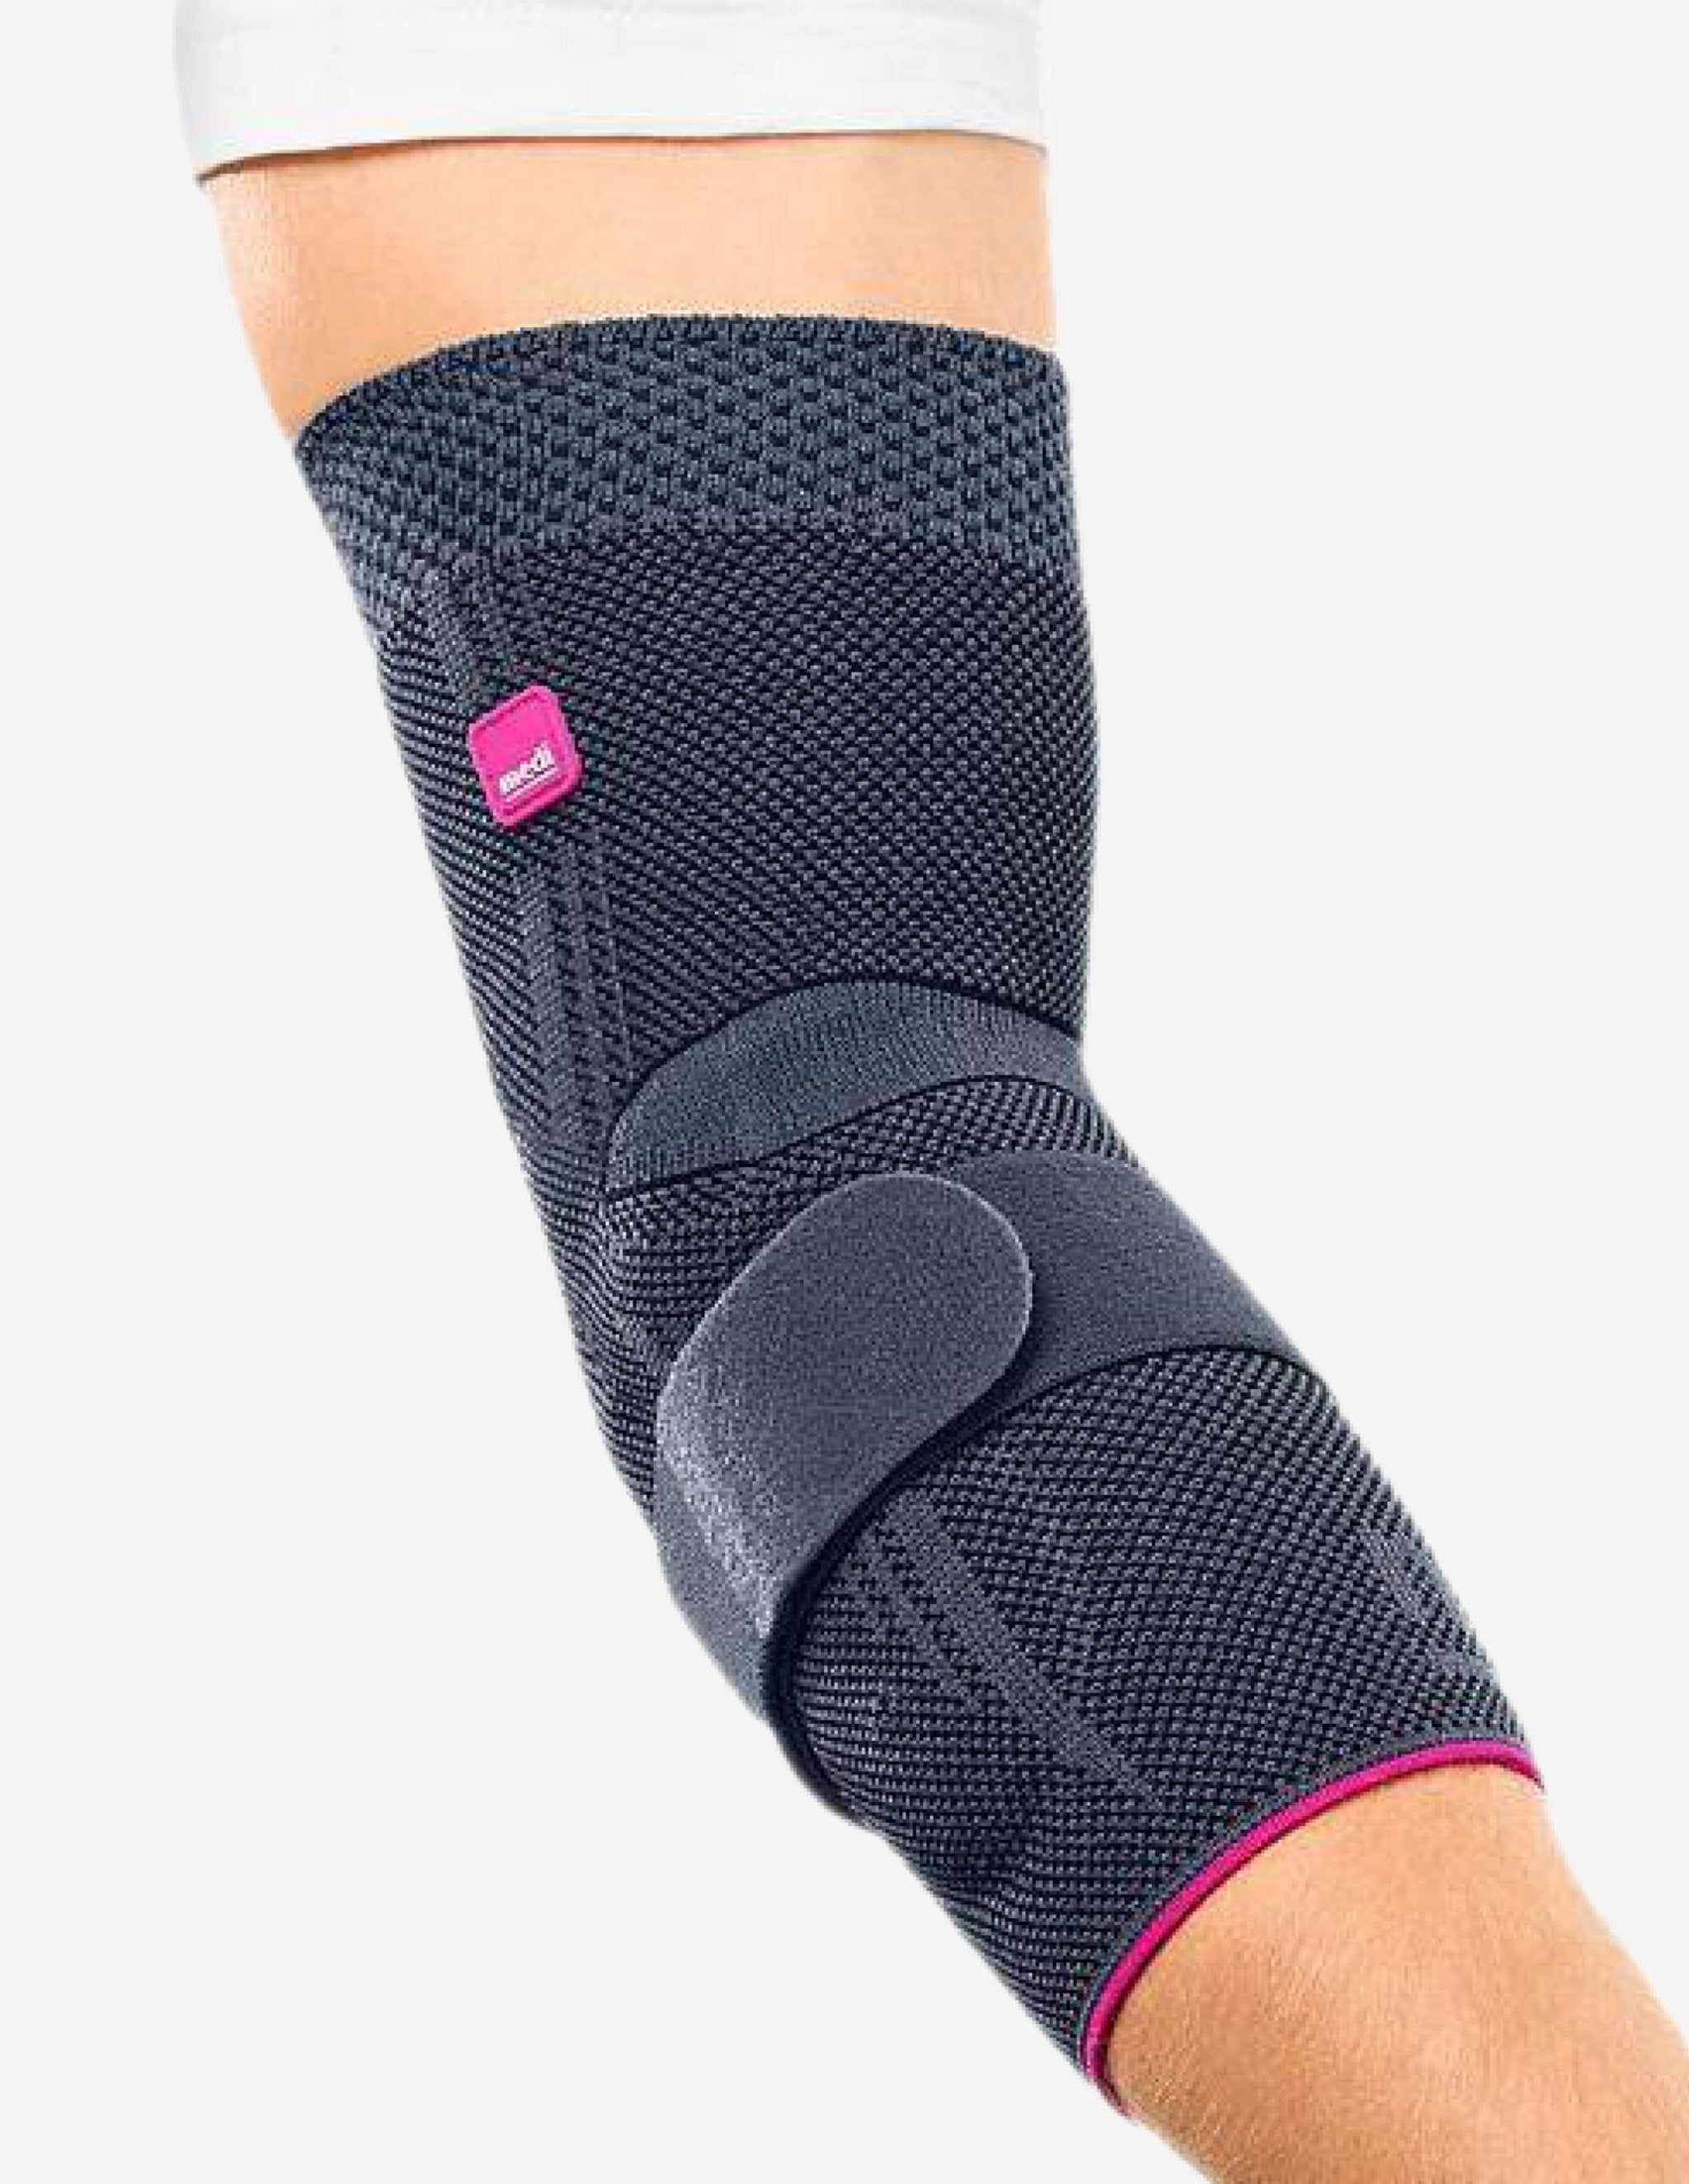 Medi Epicomed Elbow Support-Injury braces-CEP Compression-Guru Muscle